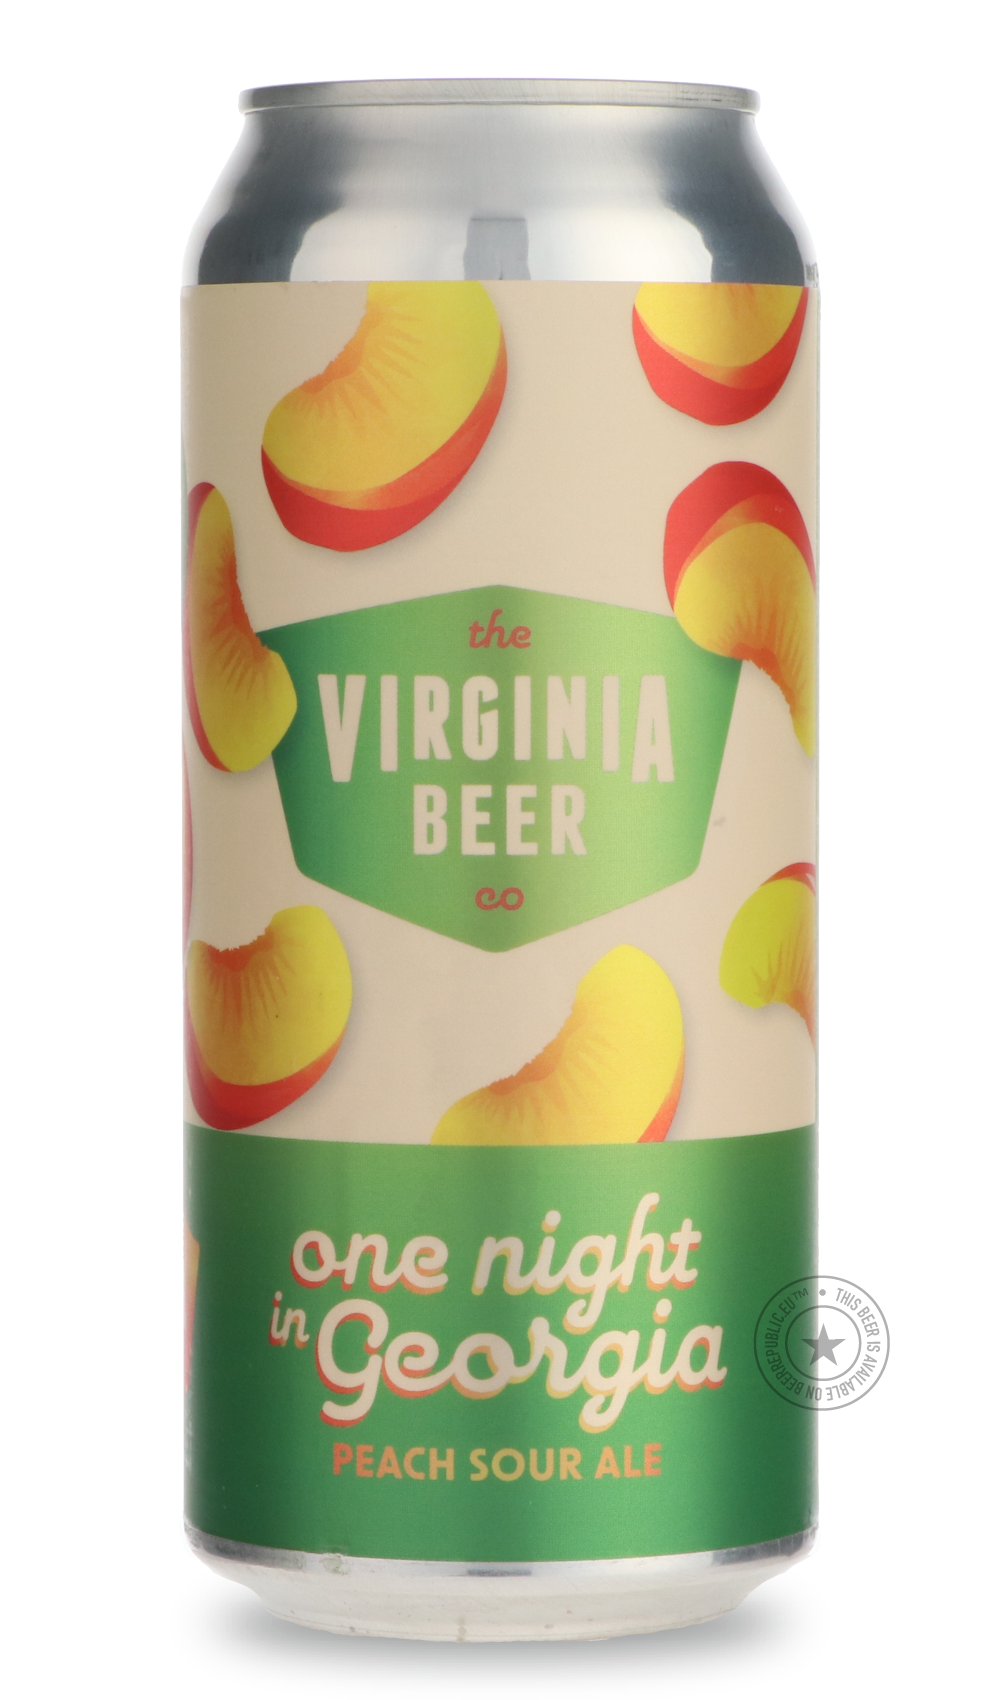 -The Virginia Beer Company- One Night In Georgia-Sour / Wild & Fruity- Only @ Beer Republic - The best online beer store for American & Canadian craft beer - Buy beer online from the USA and Canada - Bier online kopen - Amerikaans bier kopen - Craft beer store - Craft beer kopen - Amerikanisch bier kaufen - Bier online kaufen - Acheter biere online - IPA - Stout - Porter - New England IPA - Hazy IPA - Imperial Stout - Barrel Aged - Barrel Aged Imperial Stout - Brown - Dark beer - Blond - Blonde - Pilsner - 